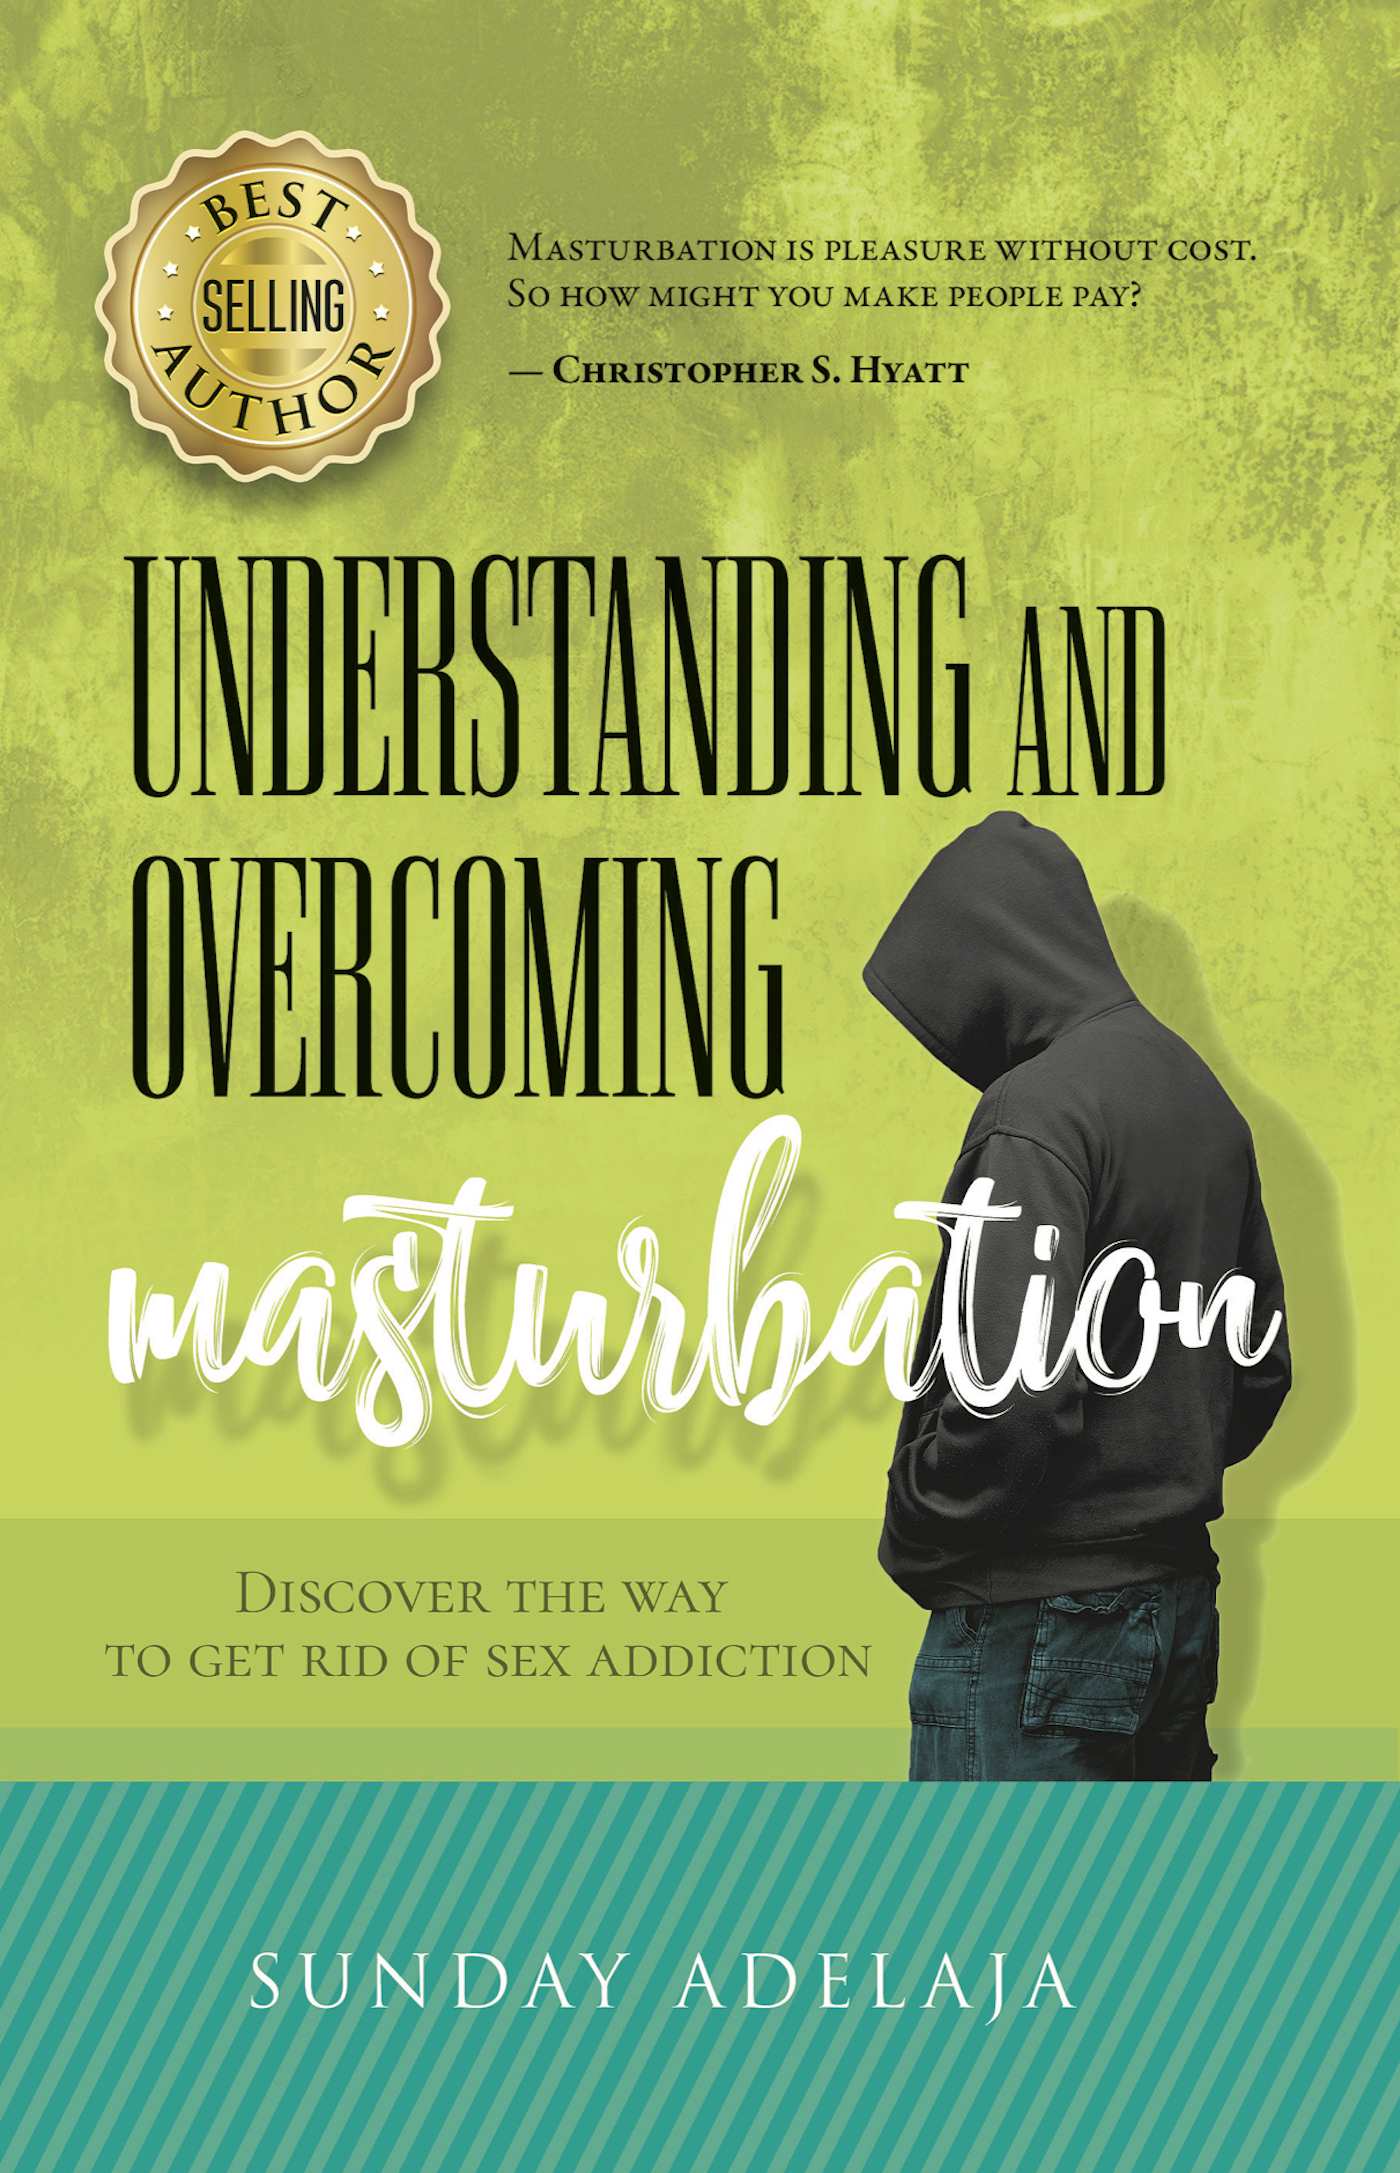 Understanding-and-Overcoming-Masturbation--Discover-the-Way-to-Get-Rid-of-Sex-Addiction